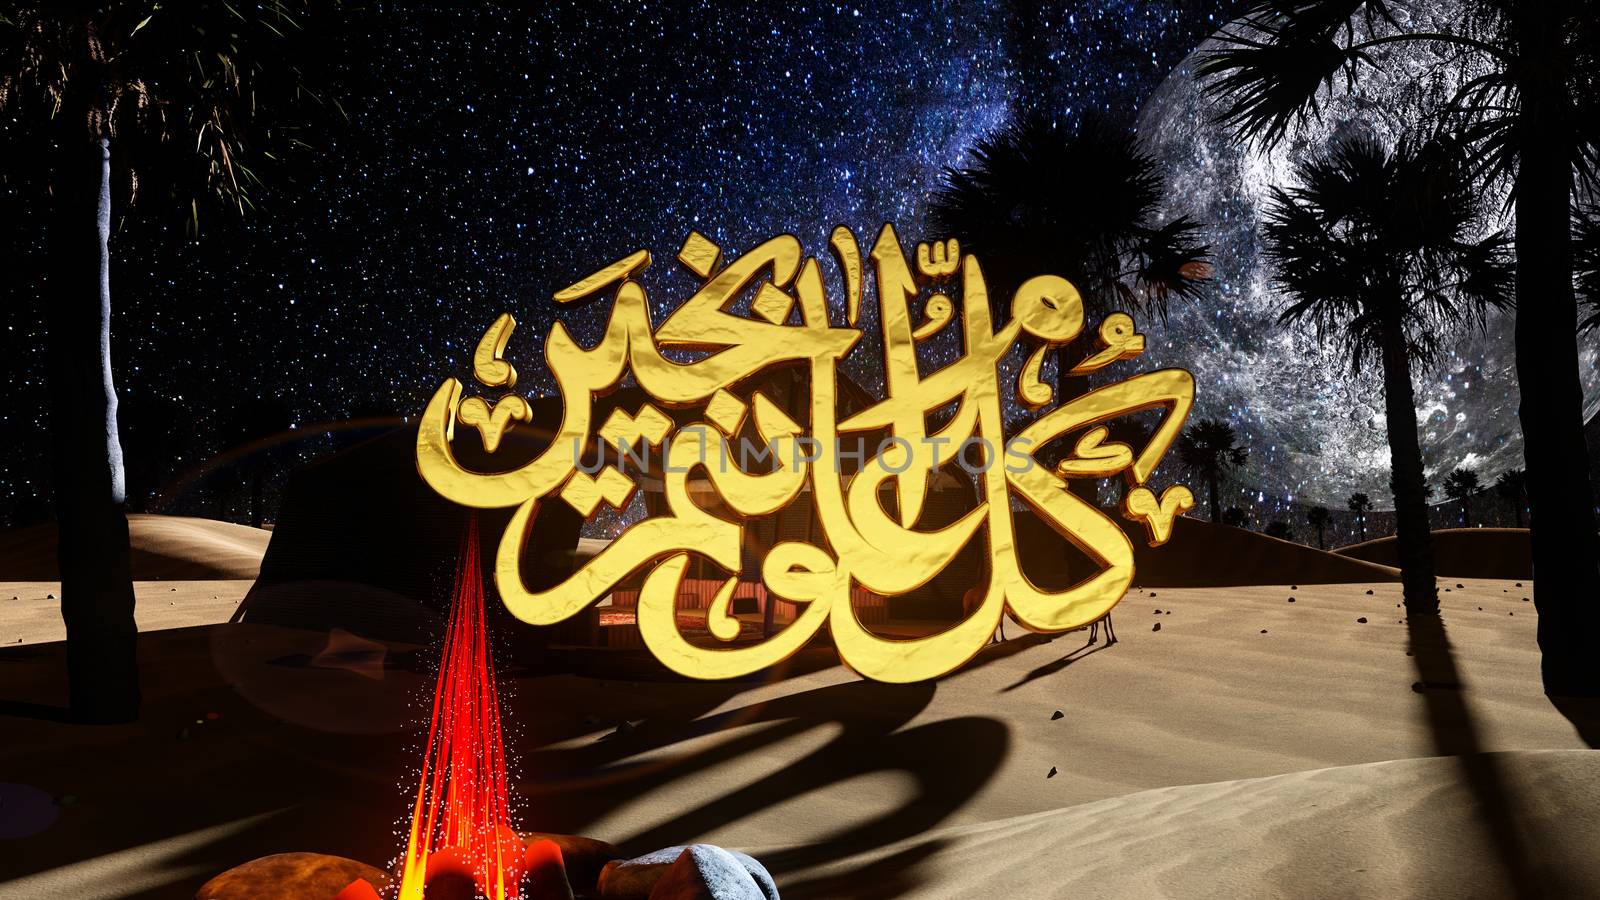 Dreamy night desert with camels, full moon, fire and Arabian tent translation is: May you be good every year